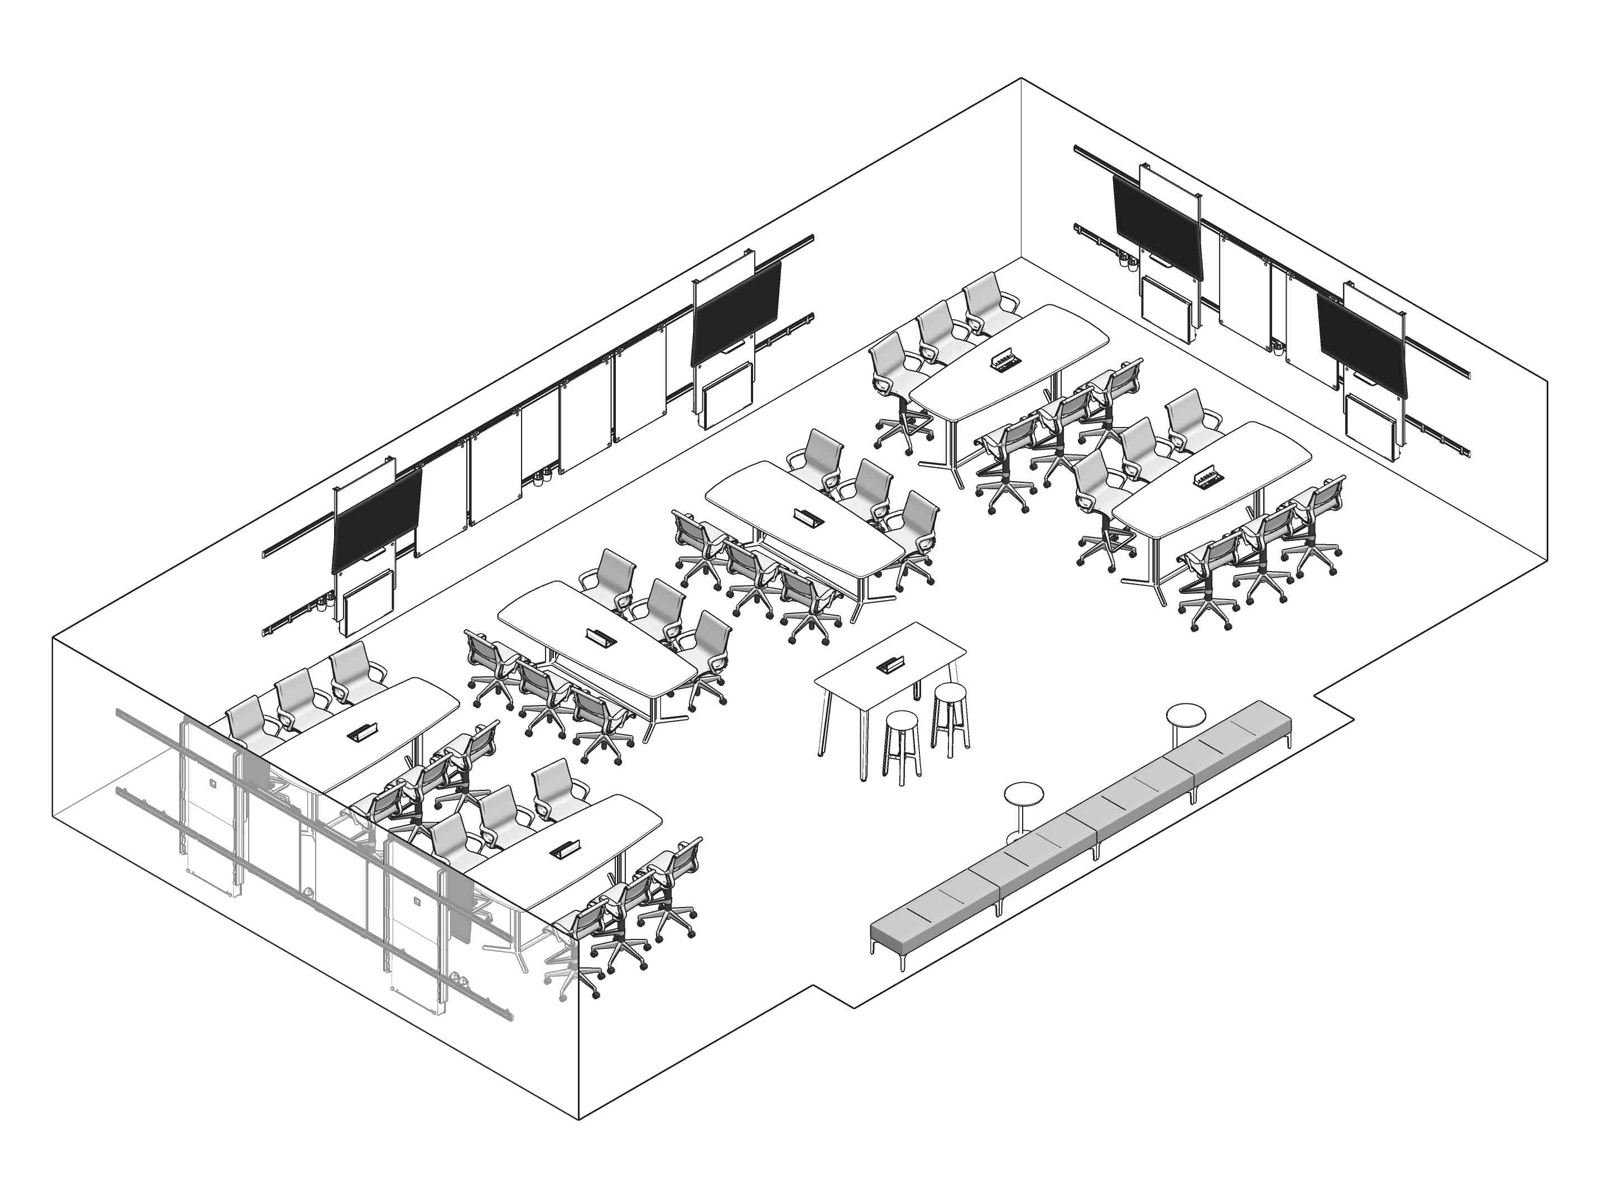 A line drawing - Classroom 005